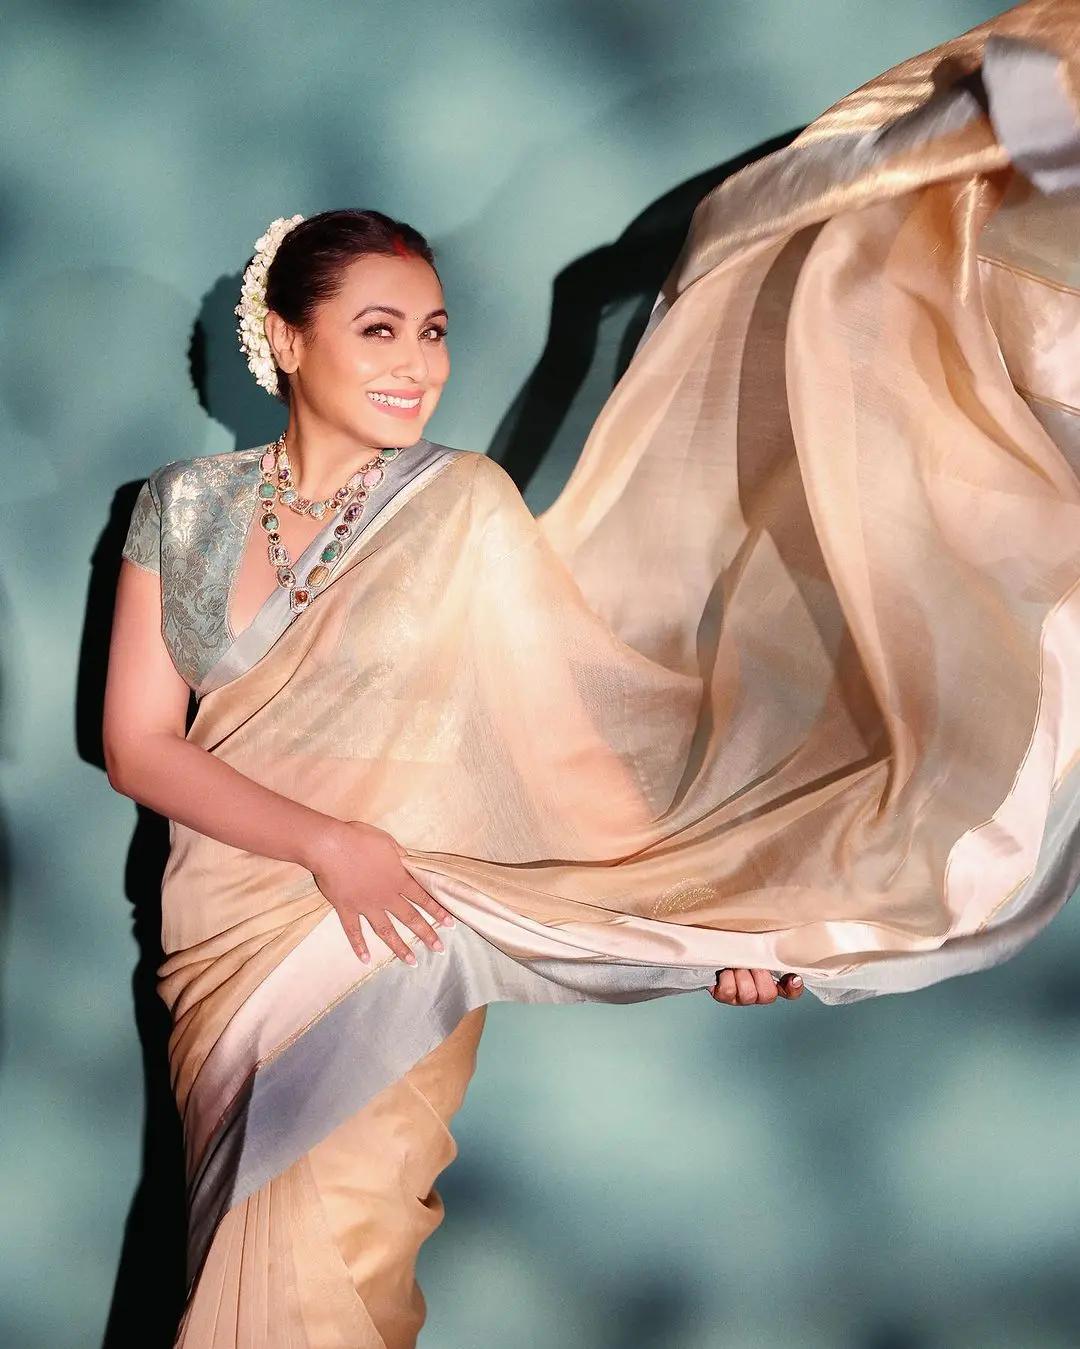 While the actress has undoubtedly served us some spectacular content. her saree looks are second to none